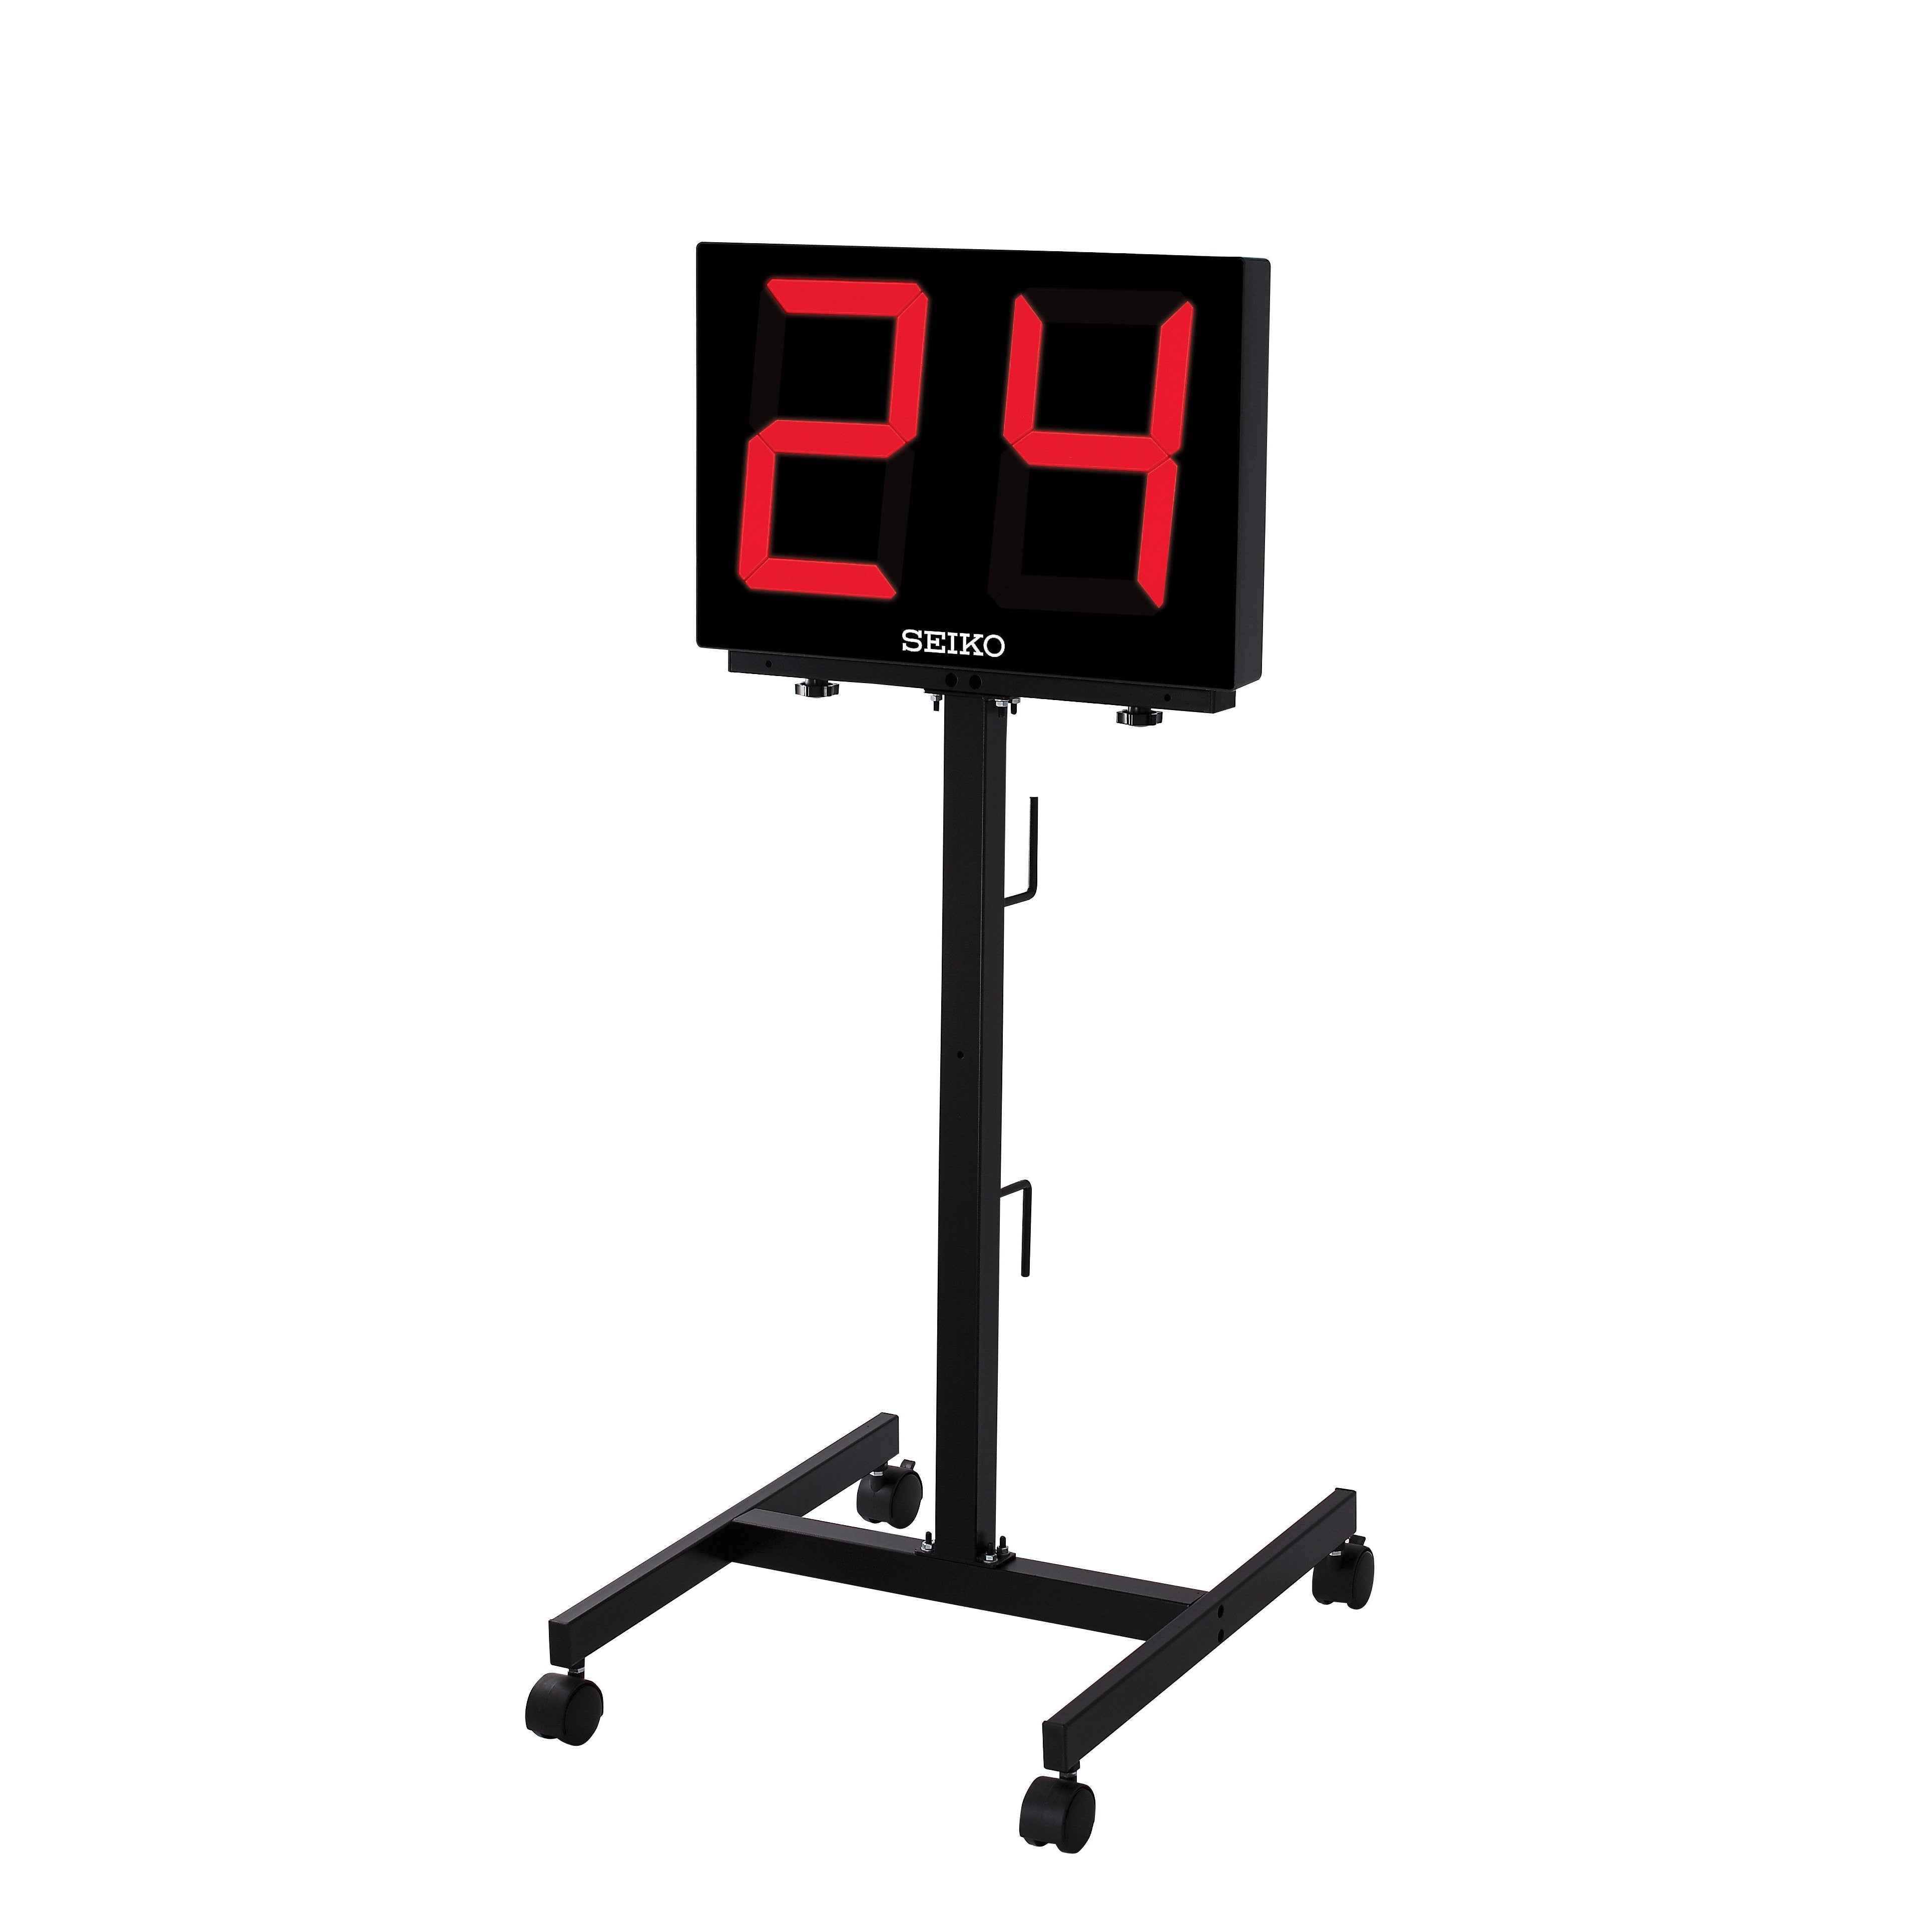 Seiko KT-011 Shot Clock or Scoreboard Caster Stand By CEI